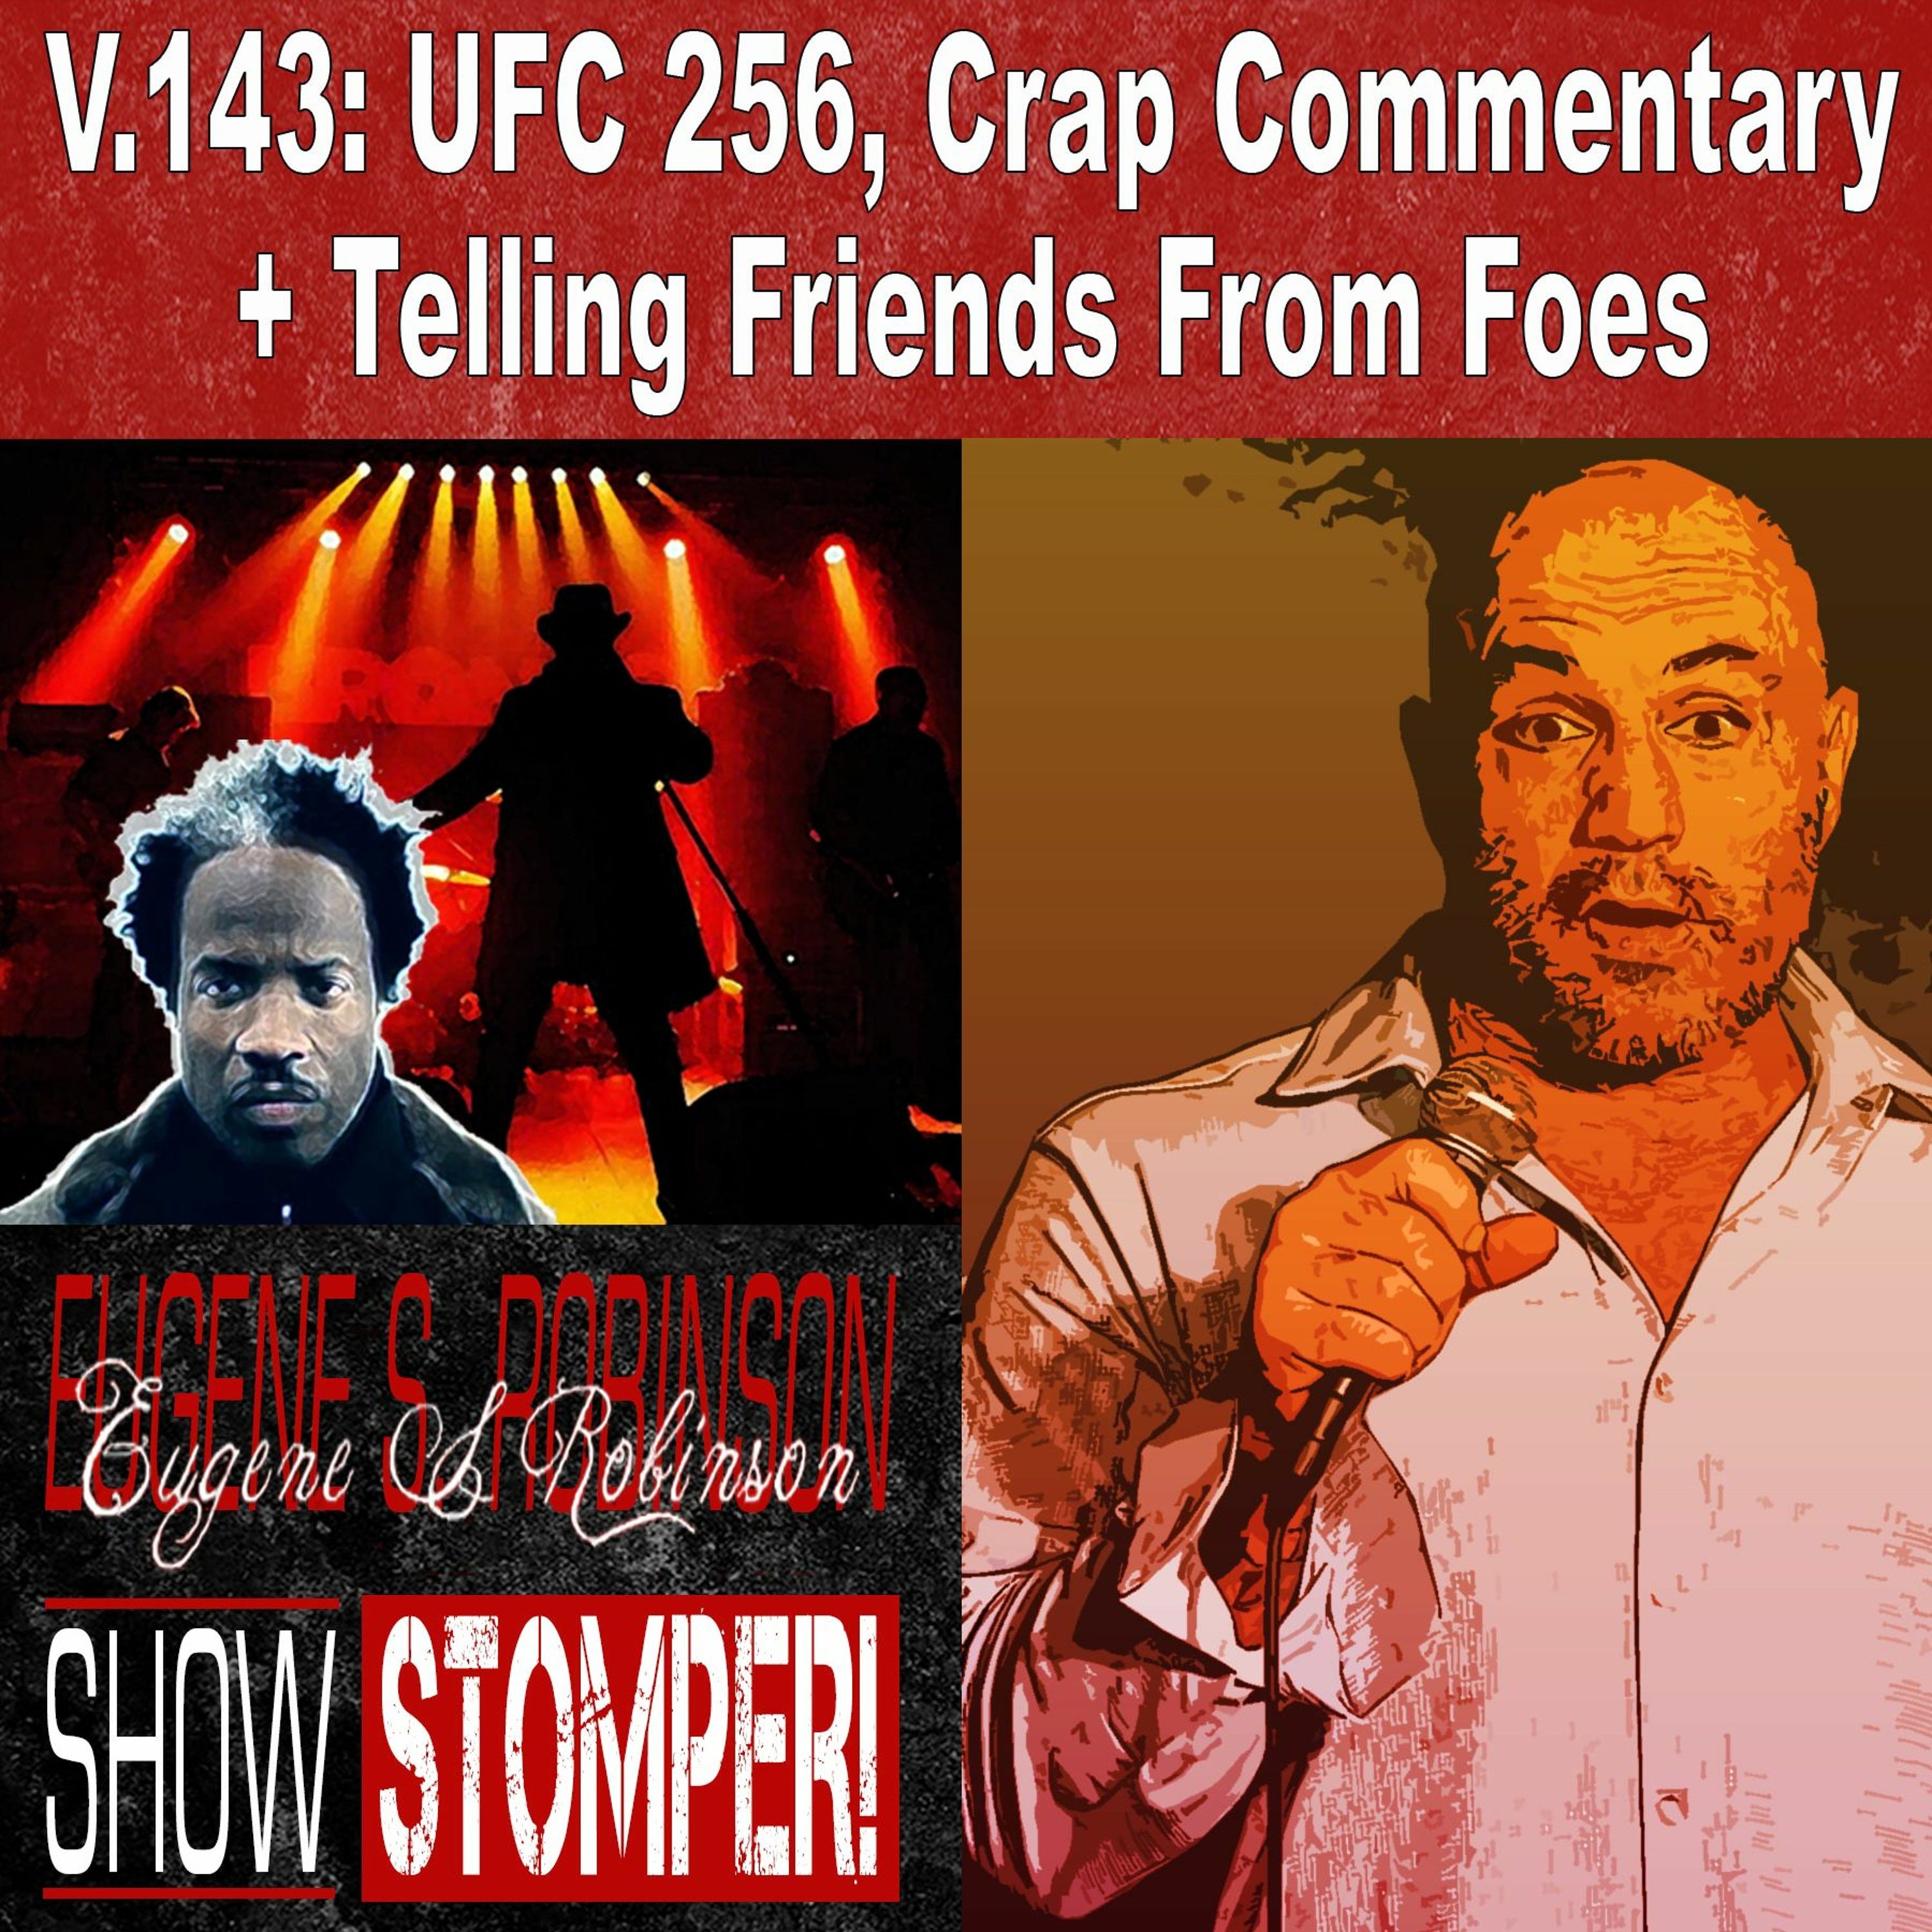 V.143 UFC 256, Crap Commentary + Telling Friends From Foes On The Eugene S. Robinson Show Stomp